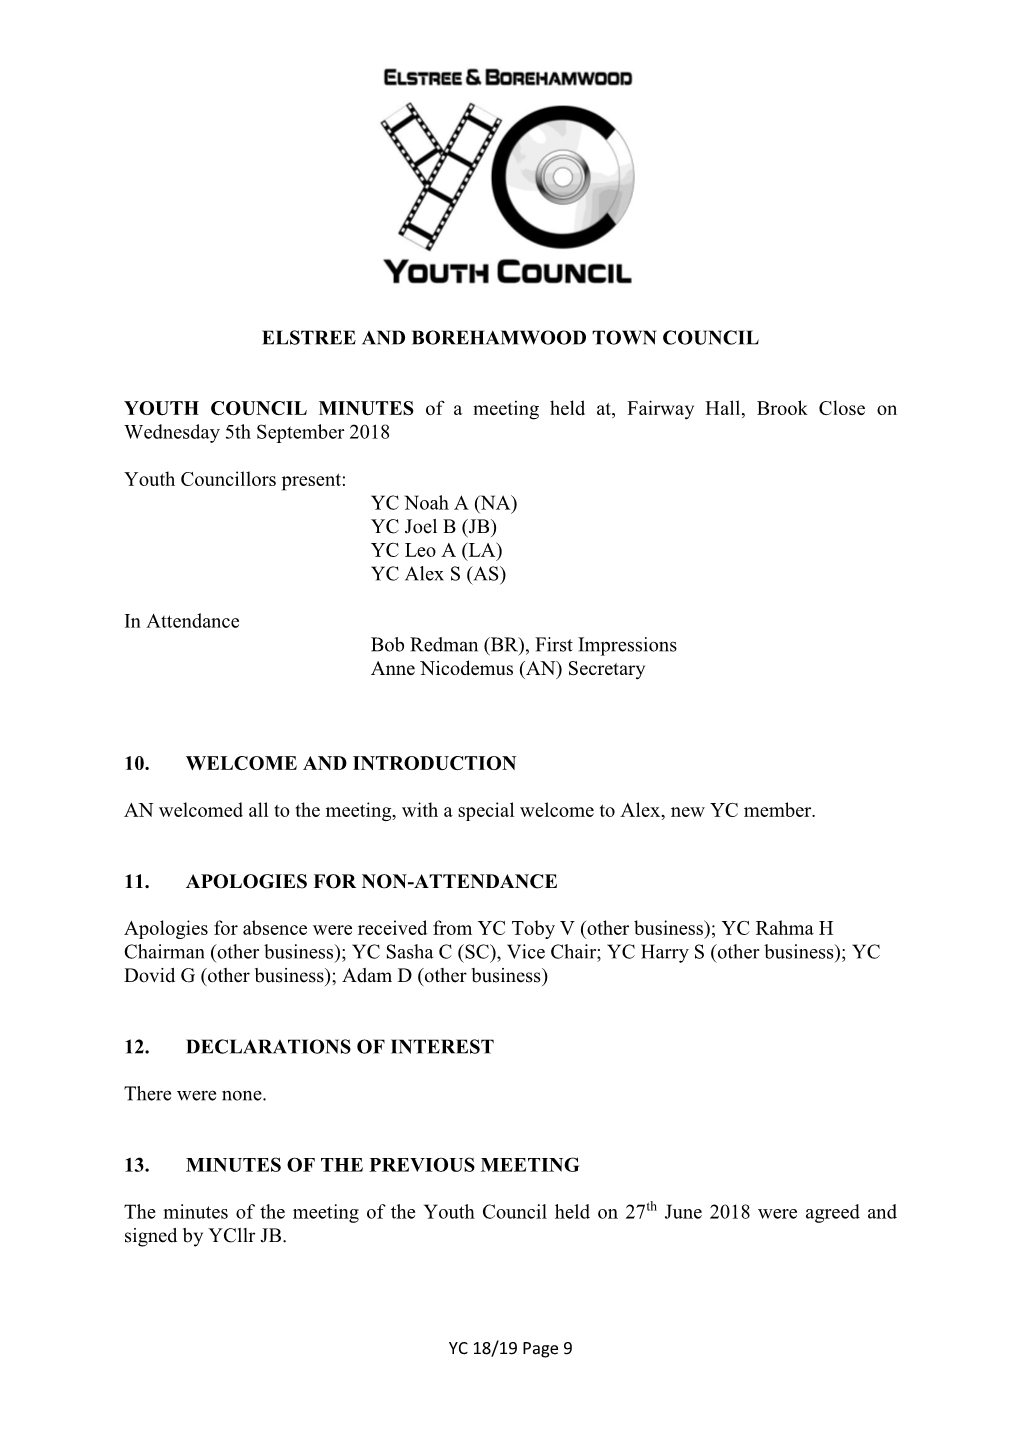 Elstree and Borehamwood Town Council Youth